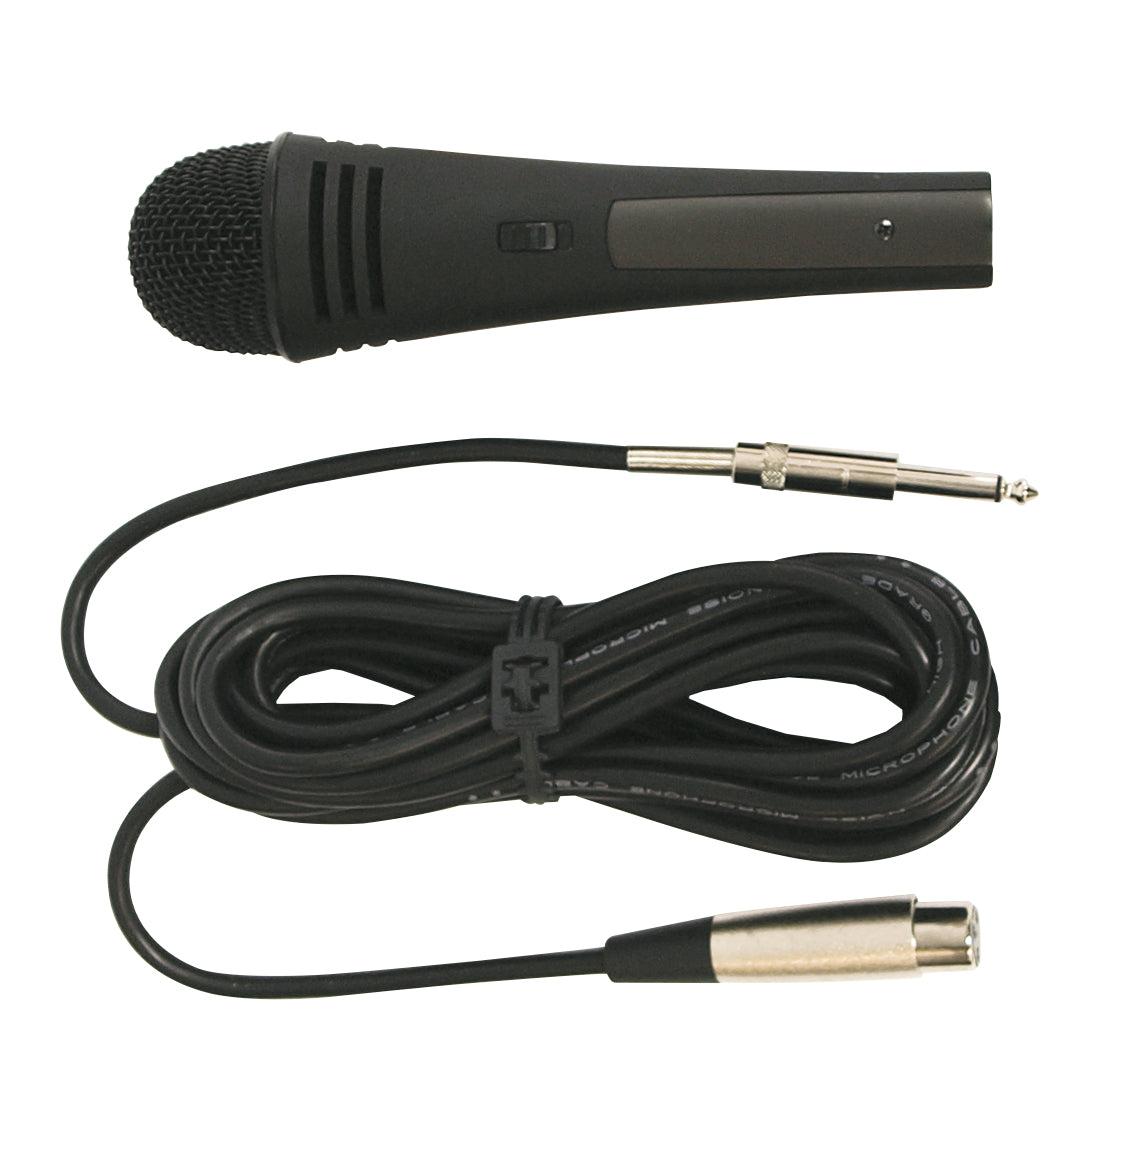 SoundArt SGM-61C Condenser Mic with Cable and Bag